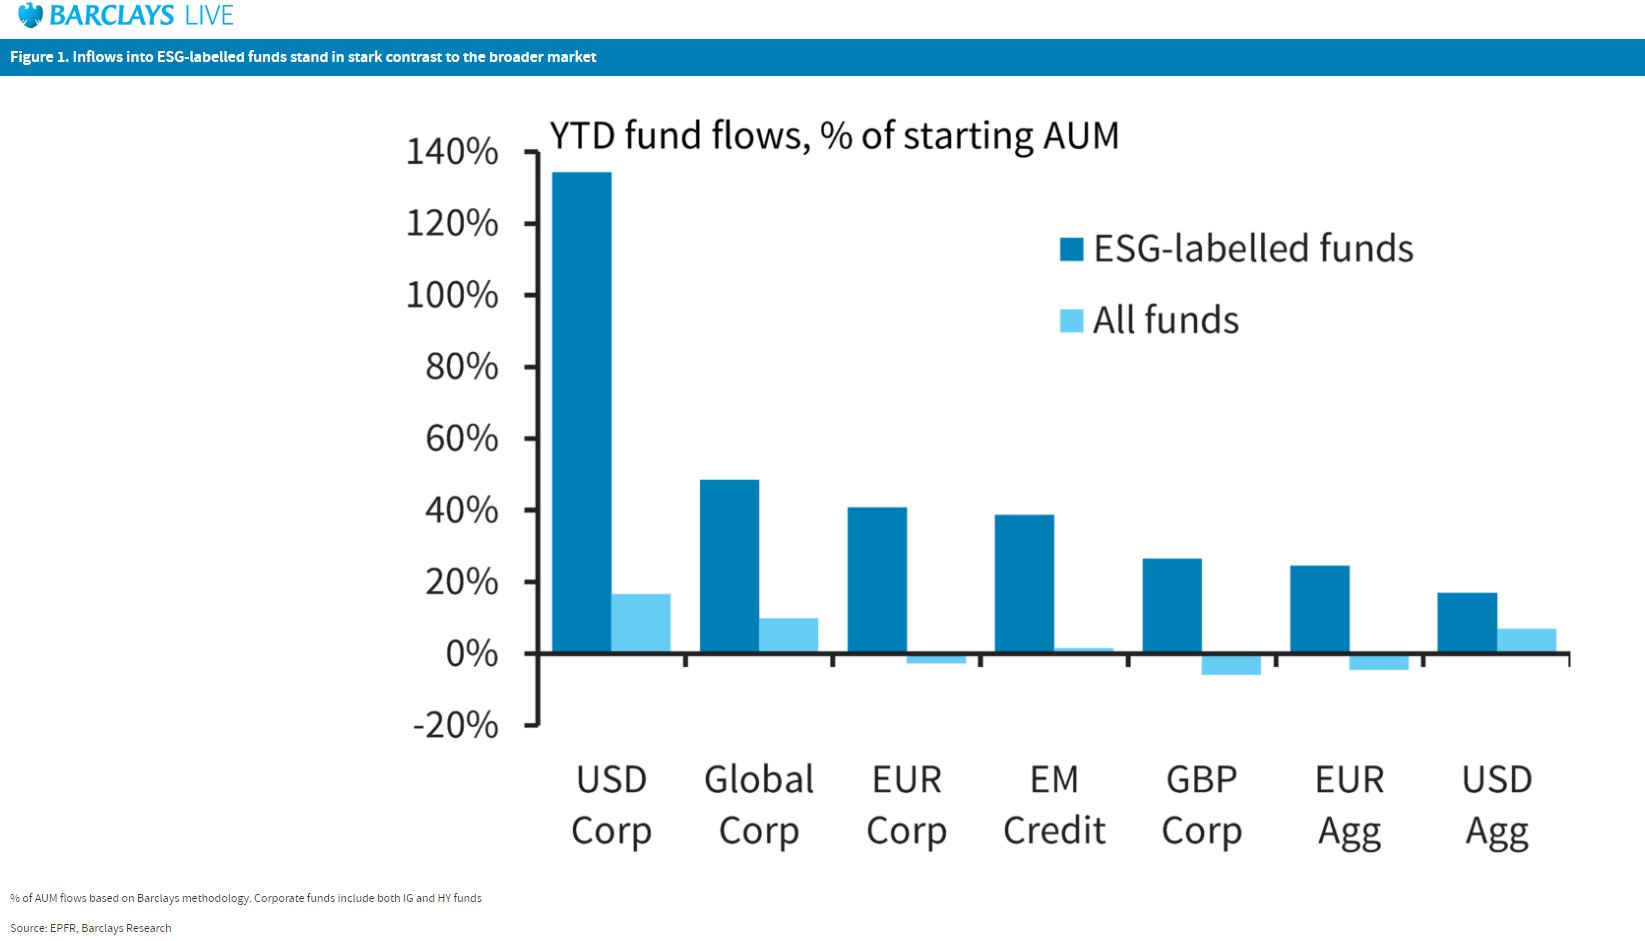 Power of branding: ESG-labelled funds attract bulk of new fund inflows